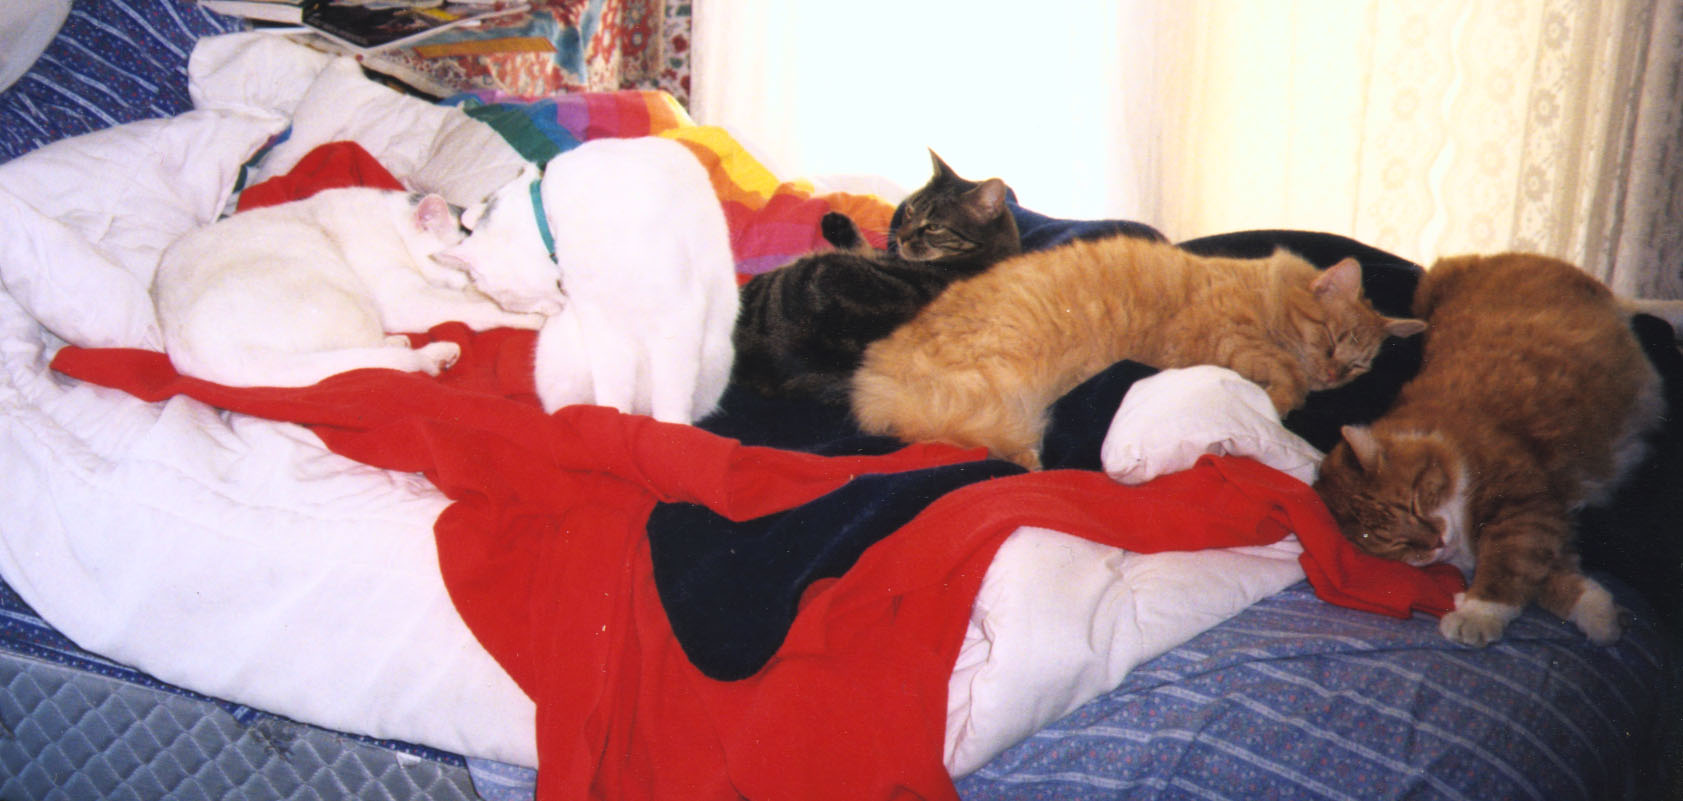 cats on bed; Actual size=130 pixels wide